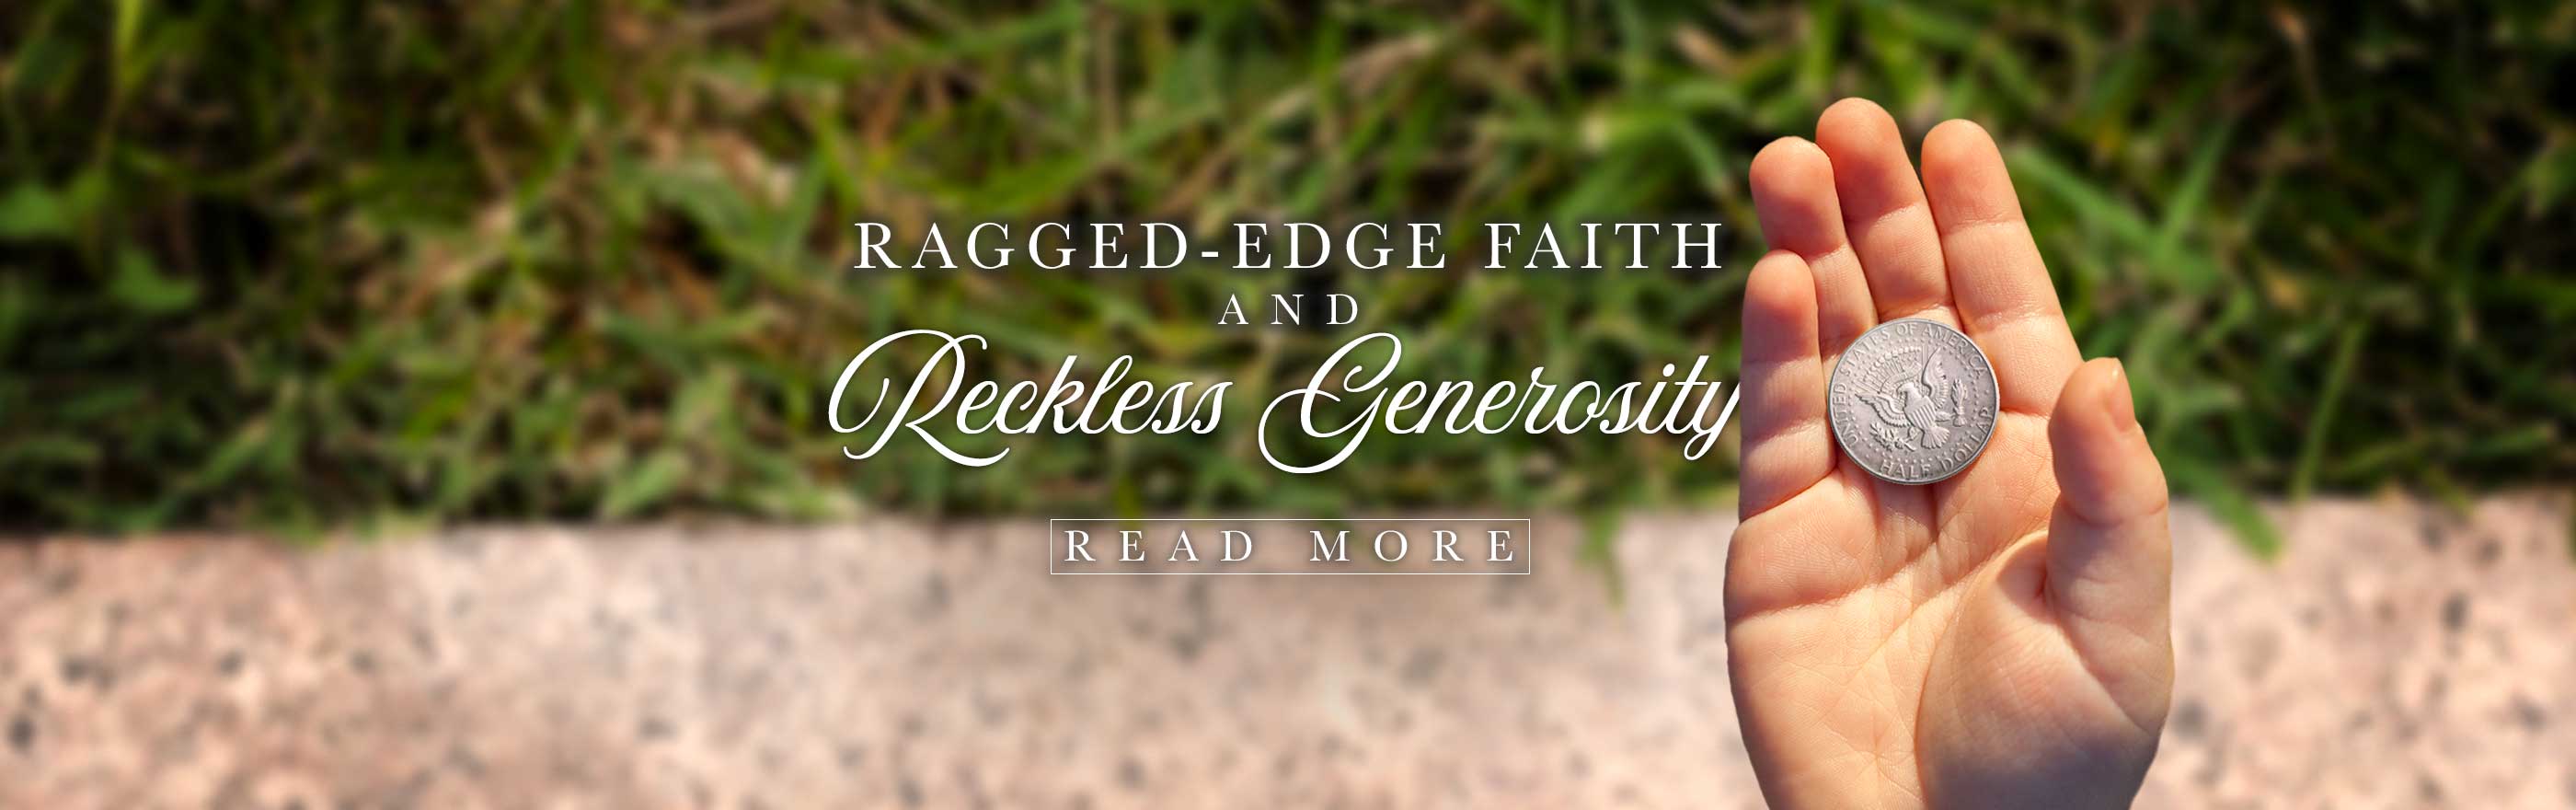 Article: Ragged-Edge Faith and Reckless Generosity